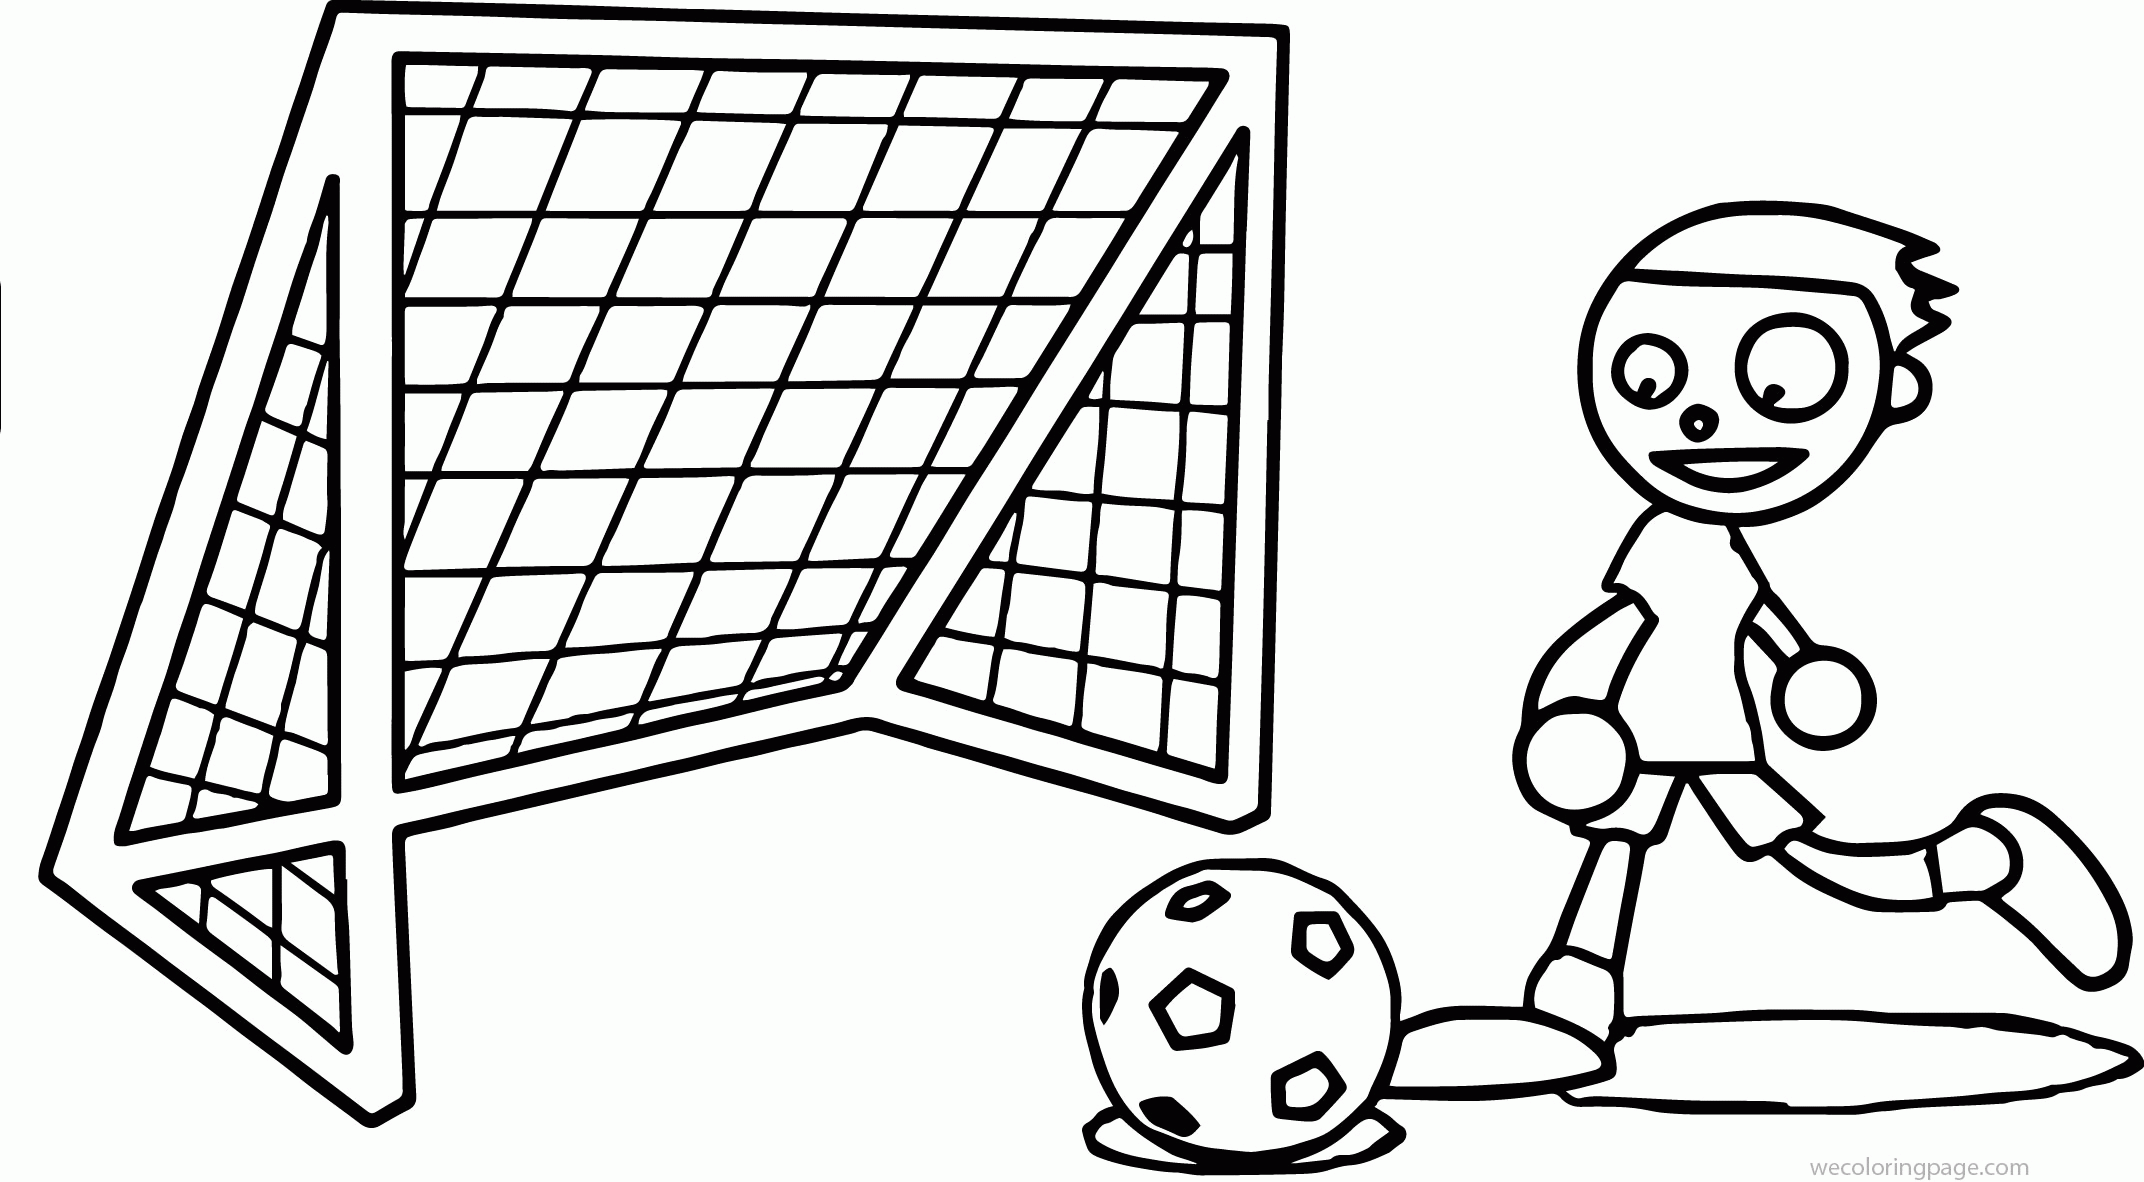 Pbs Kids Playing Soccer Coloring Page | Wecoloringpage